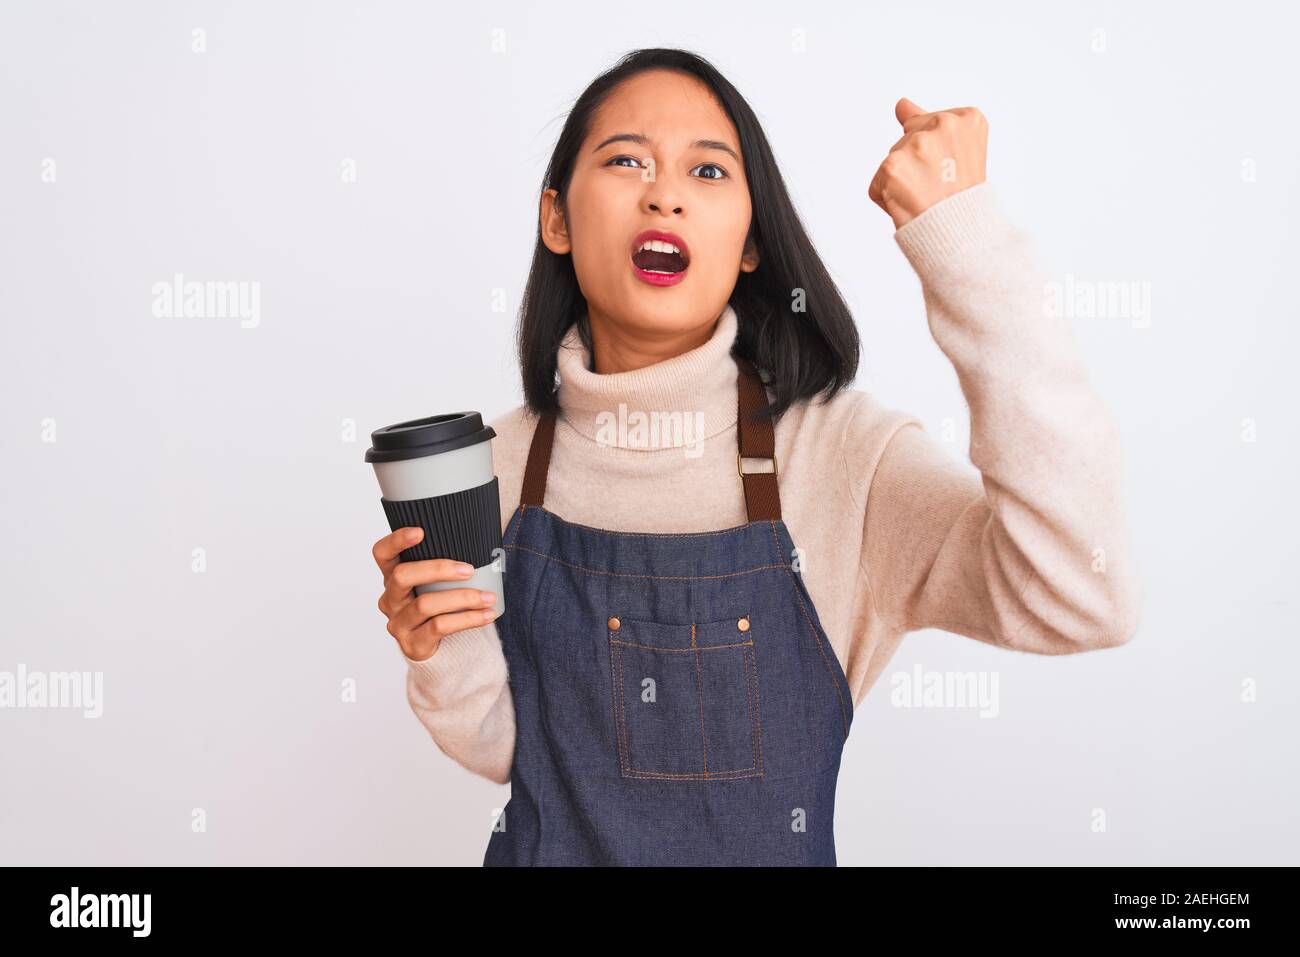 Beautiful barista chinese woman wearing apron holding coffee over isolated white background annoyed and frustrated shouting with anger, crazy and yell Stock Photo